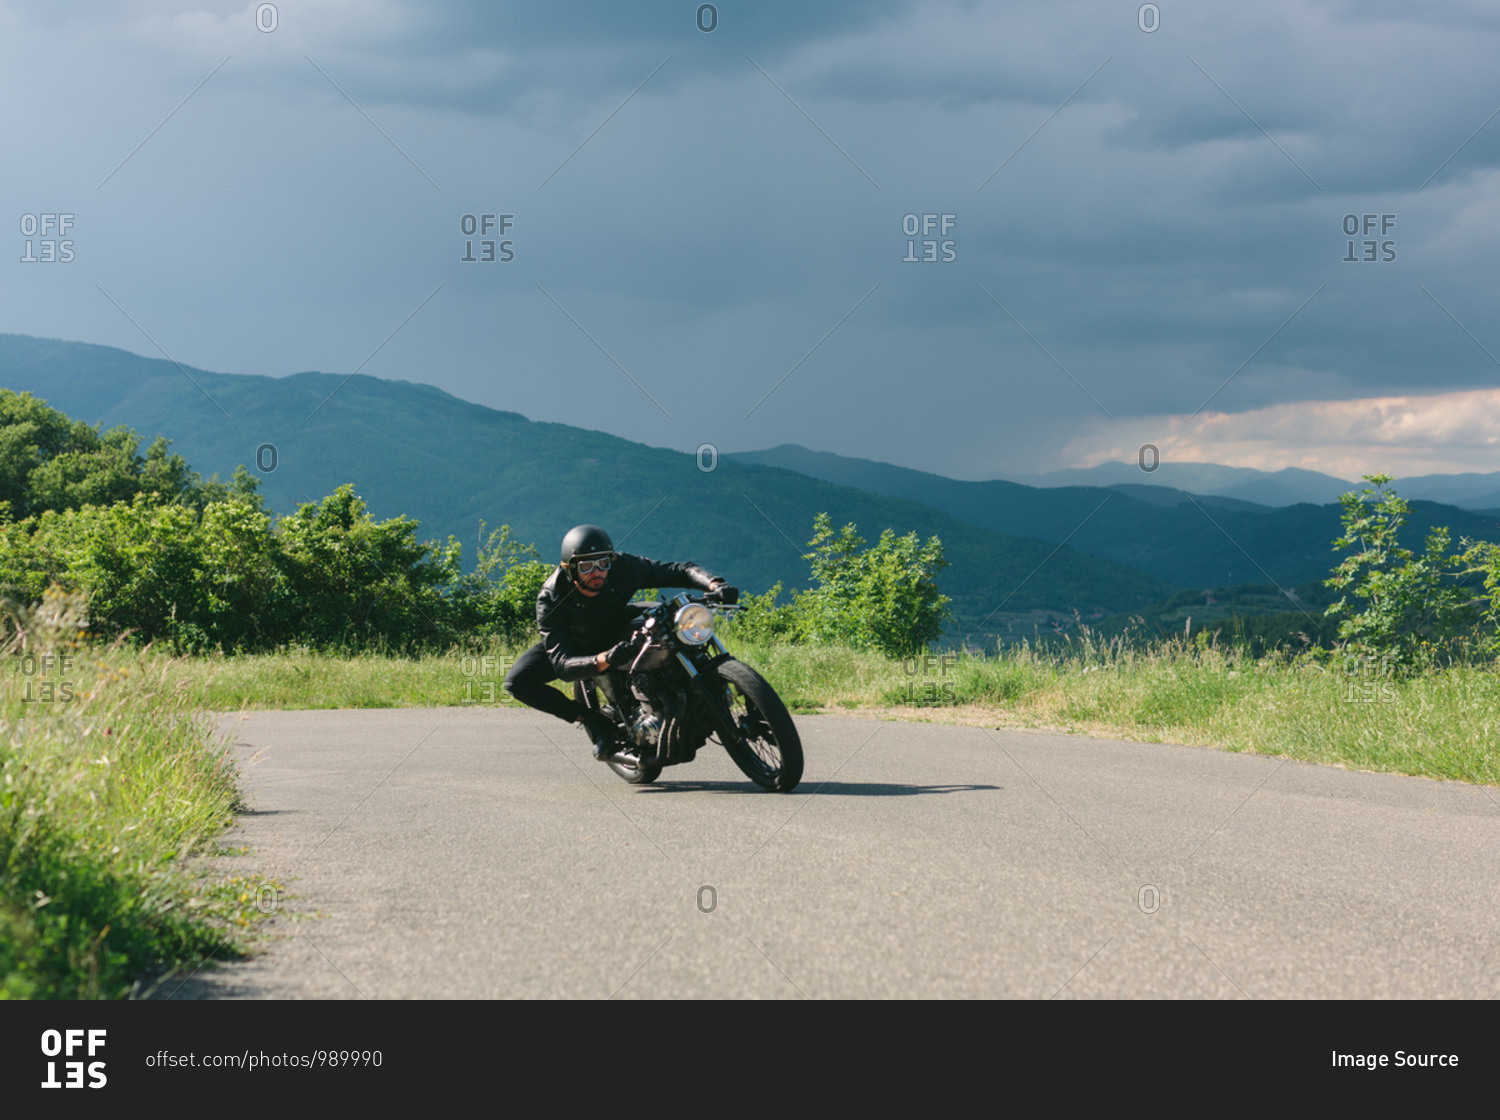 Young male motorcyclist on vintage motorcycle swerving
around rural road bend, Florence, Tuscany, Italy stock photo -
OFFSET